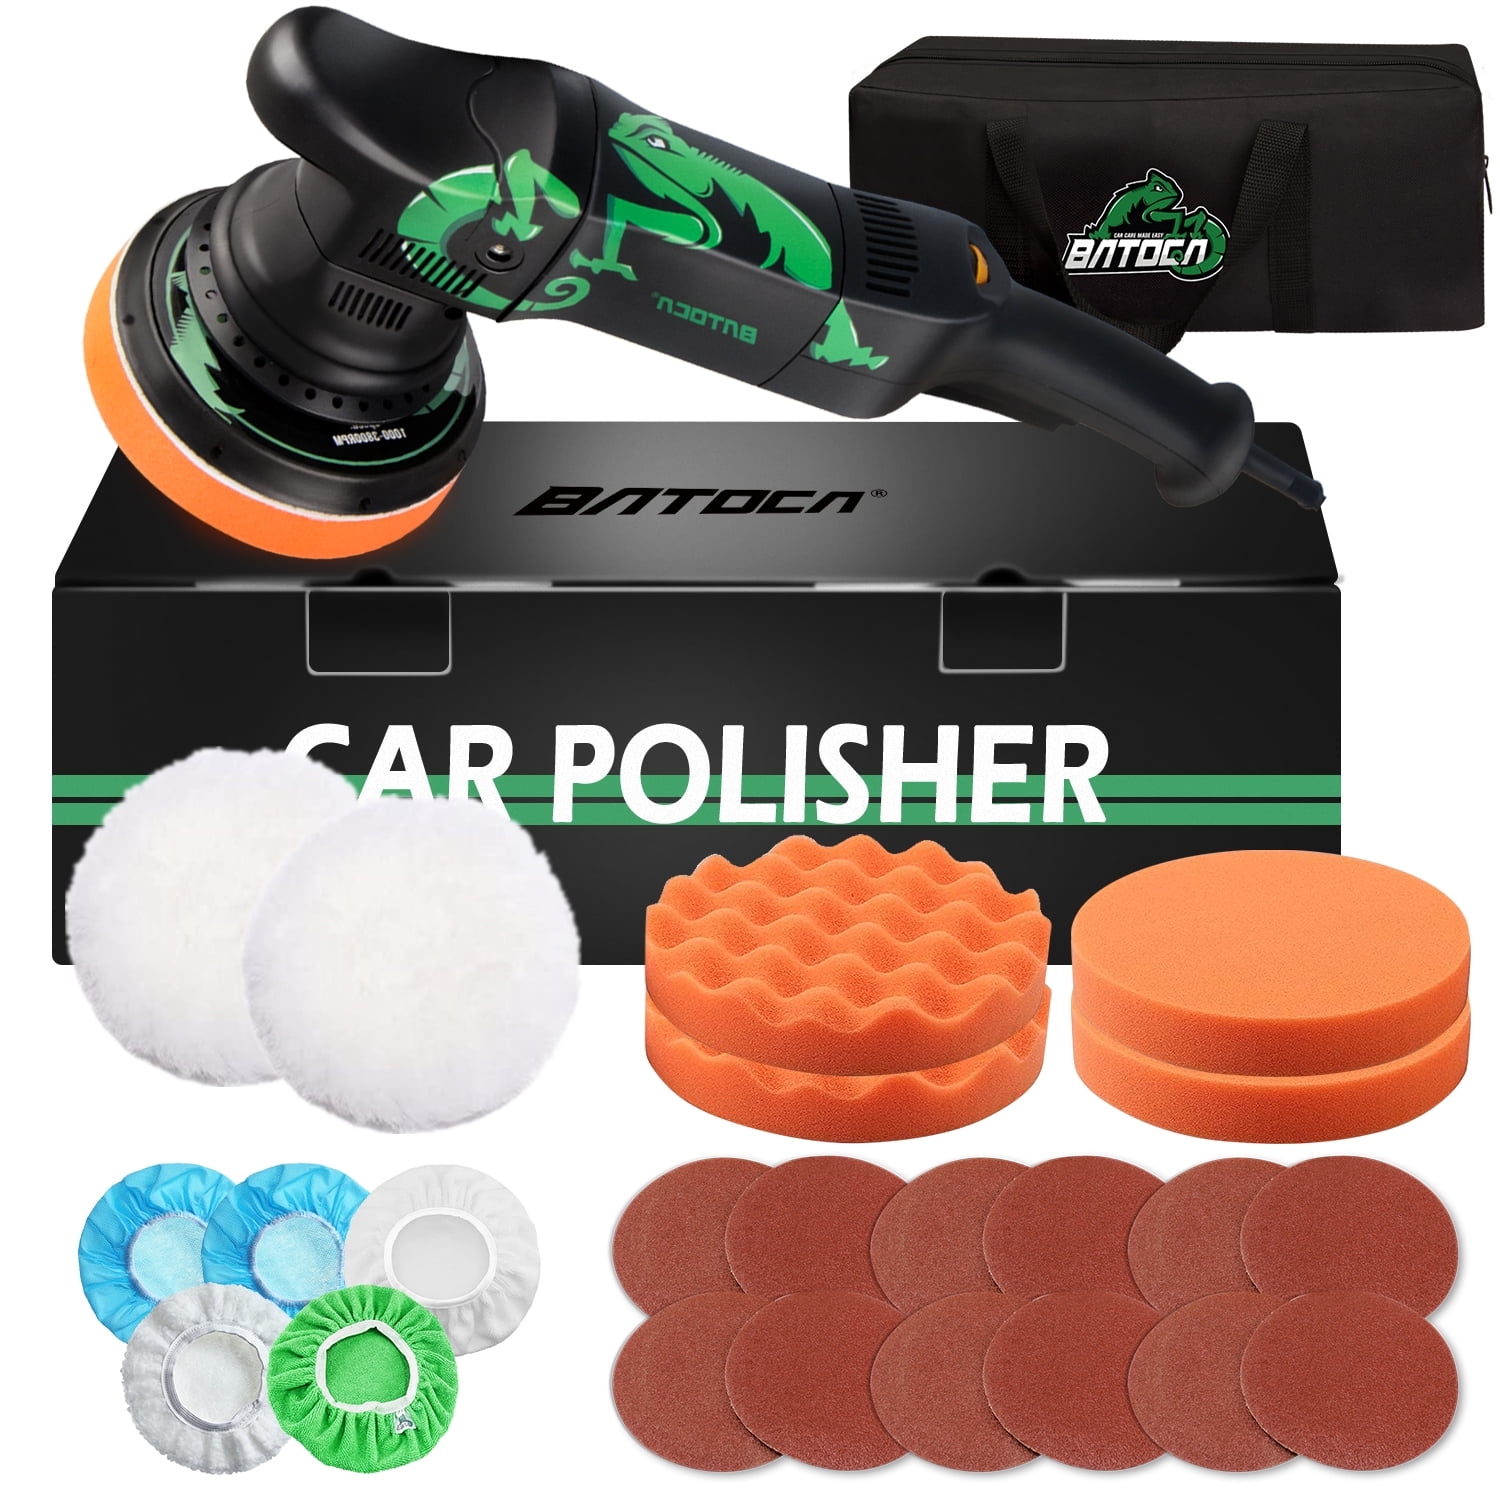 BATOCA 6 inch Dual Action Polisher Buffer Kit 6 Variable Speed 3800 RPM for  Car Detailing Boat Floor